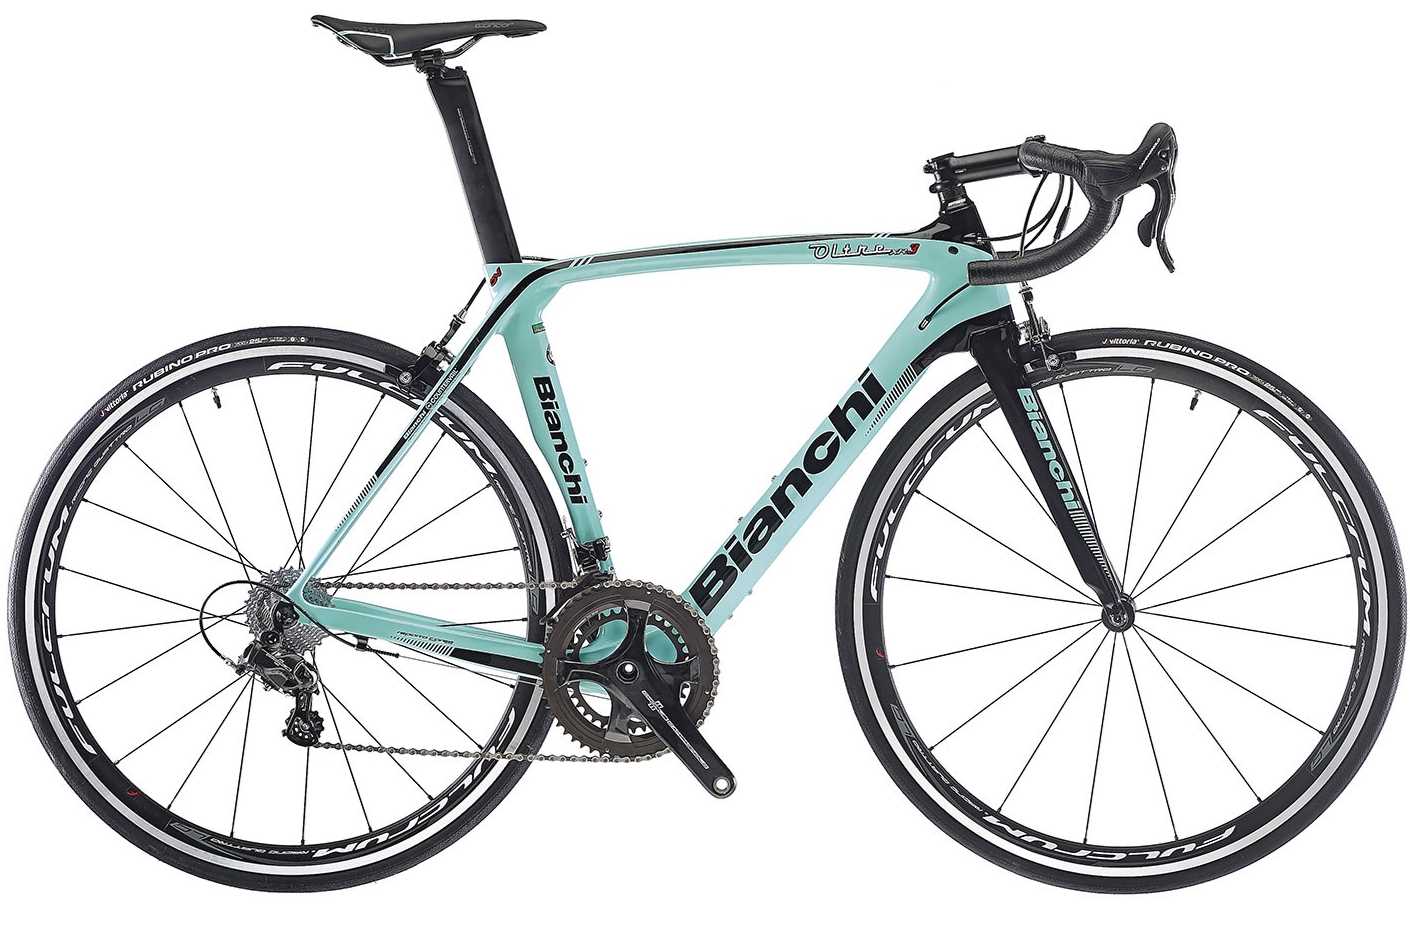 Bianchi 2018 road bikes: which model is right for you?